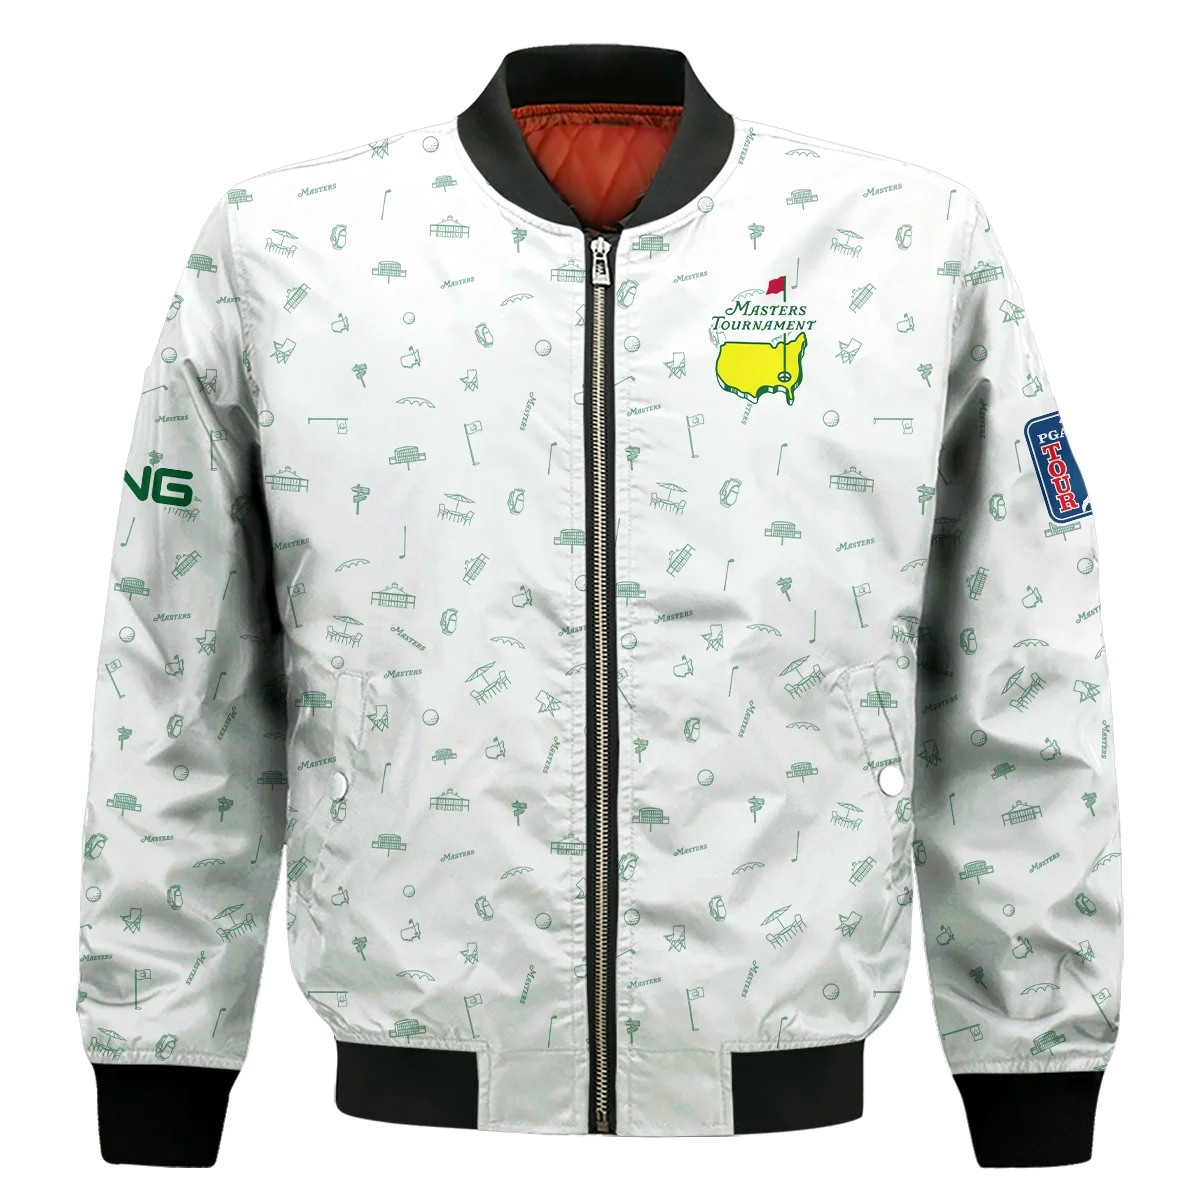 Golf Masters Tournament Ping Bomber Jacket Augusta Icons Pattern White Green Golf Sports Bomber Jacket GBJ1313